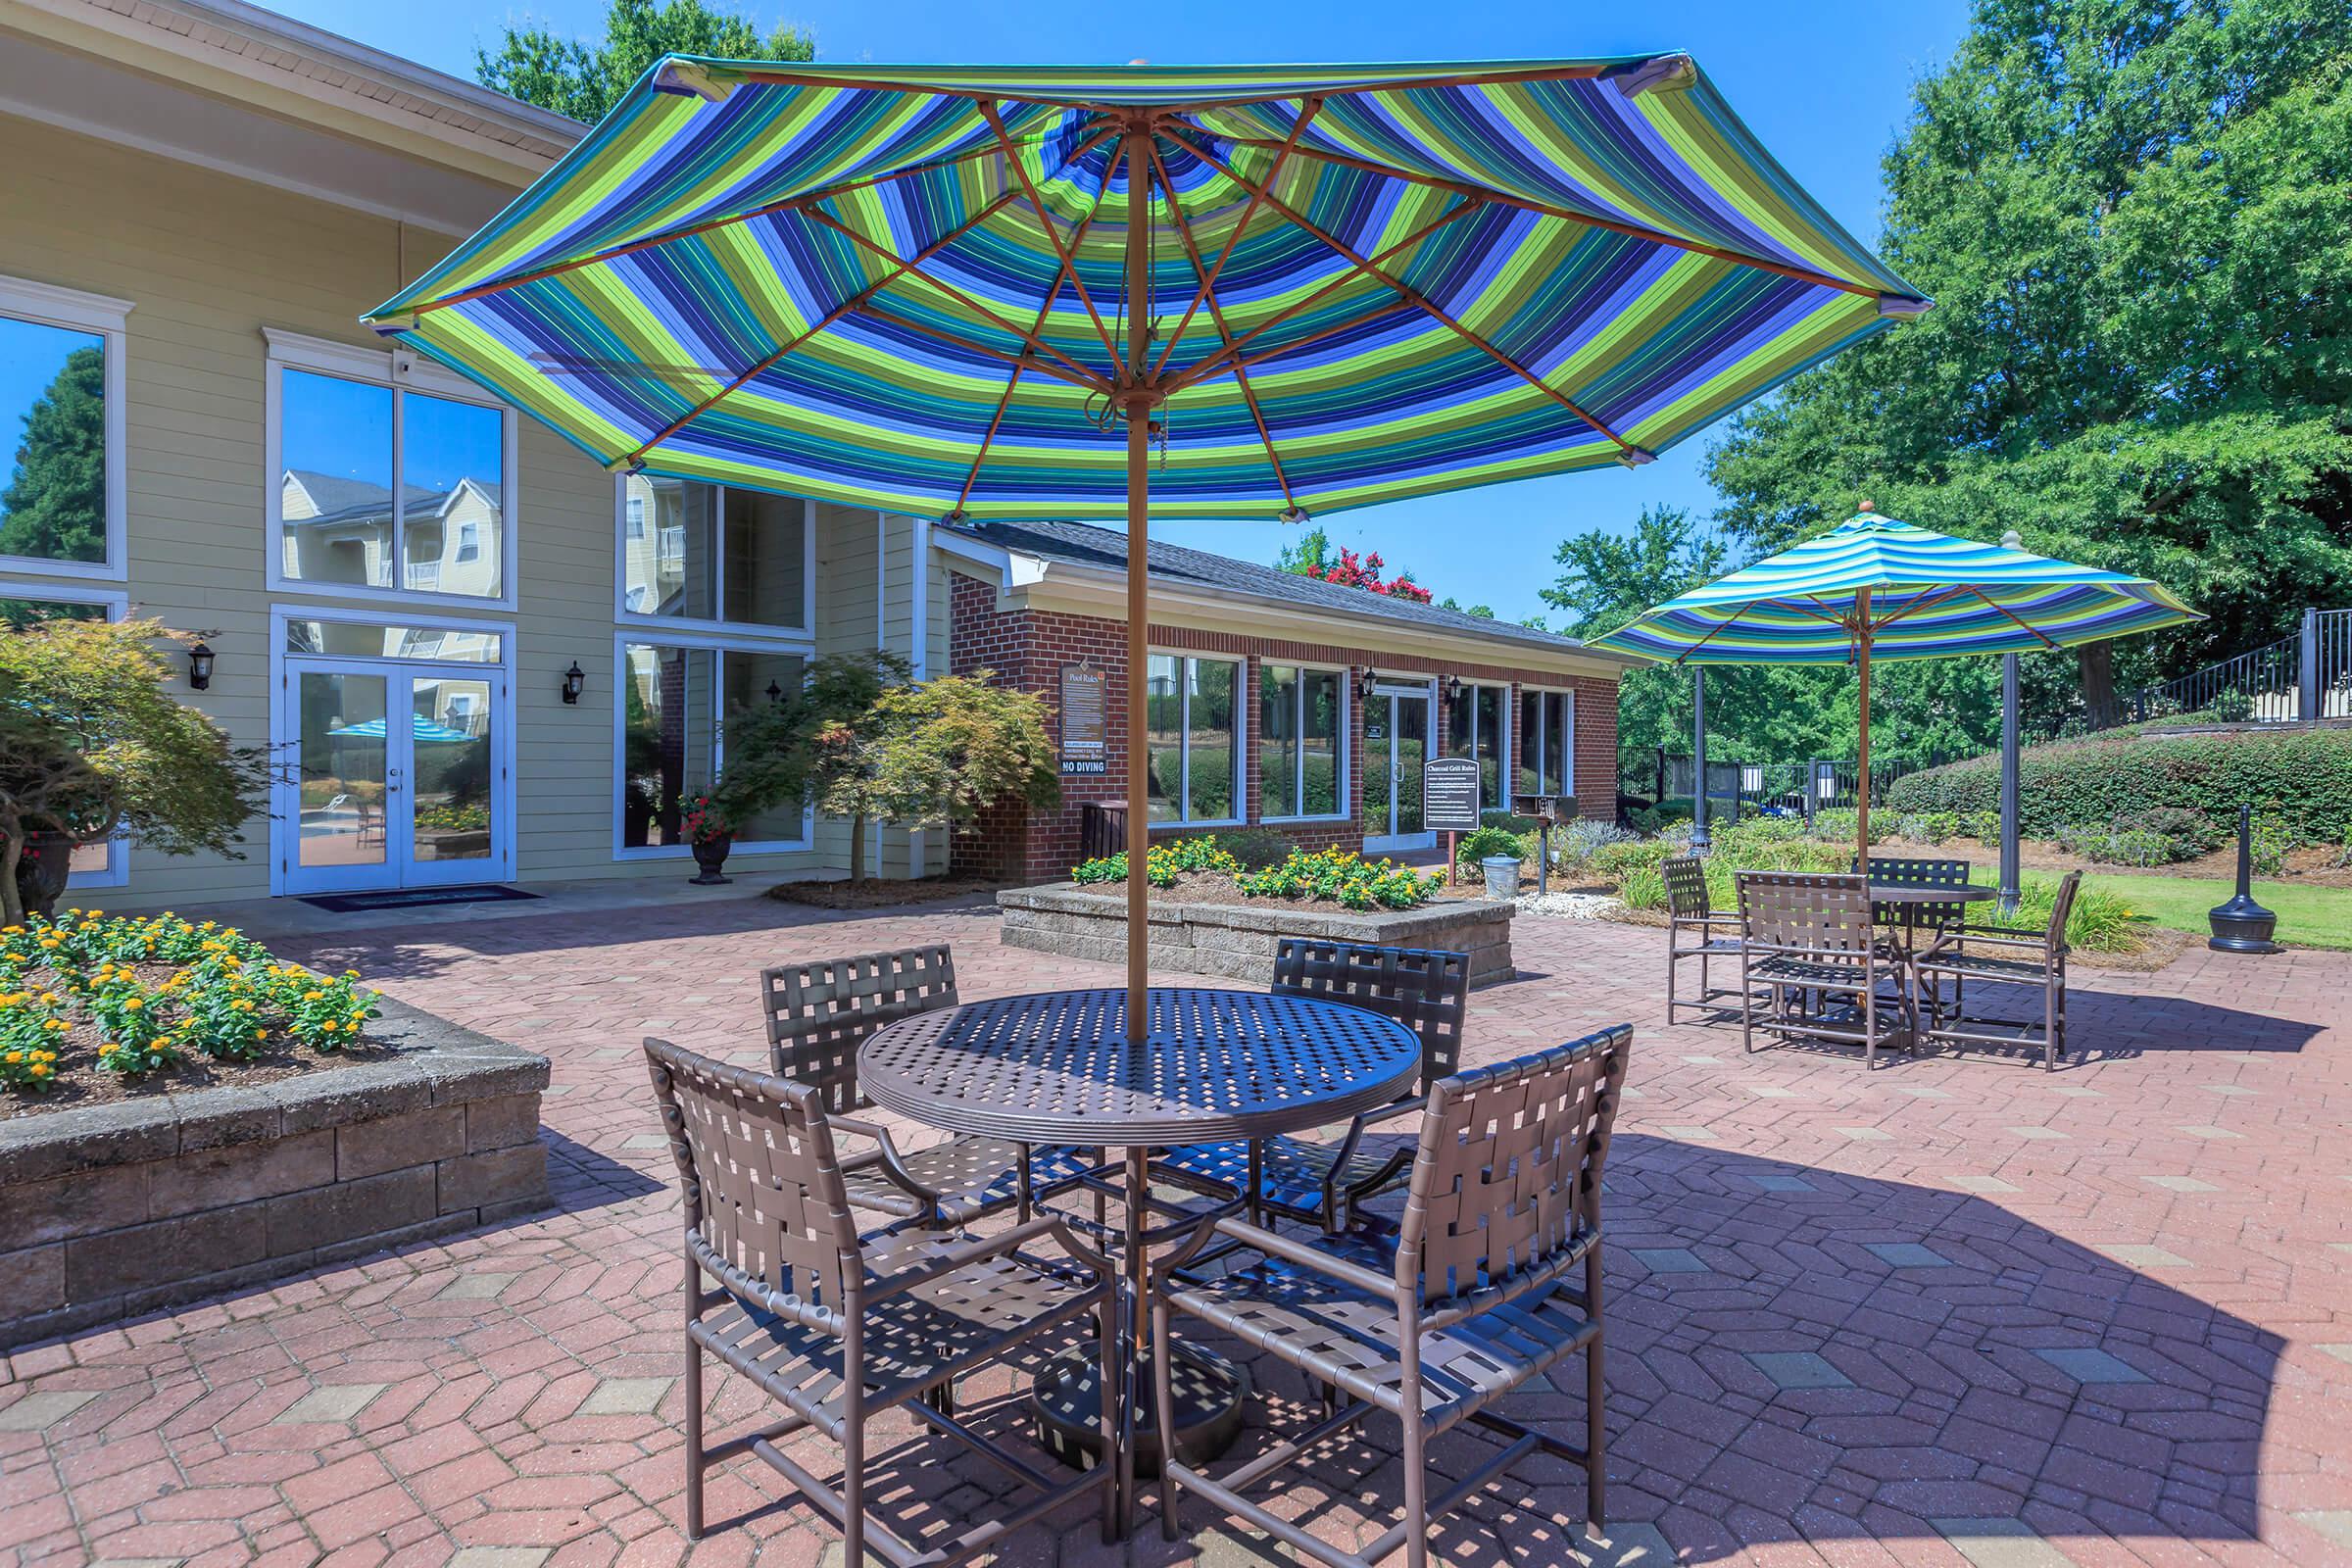 RELAX AND ENJOY THE OUTDOORS AT WATERFORD HILLS APARTMENTS